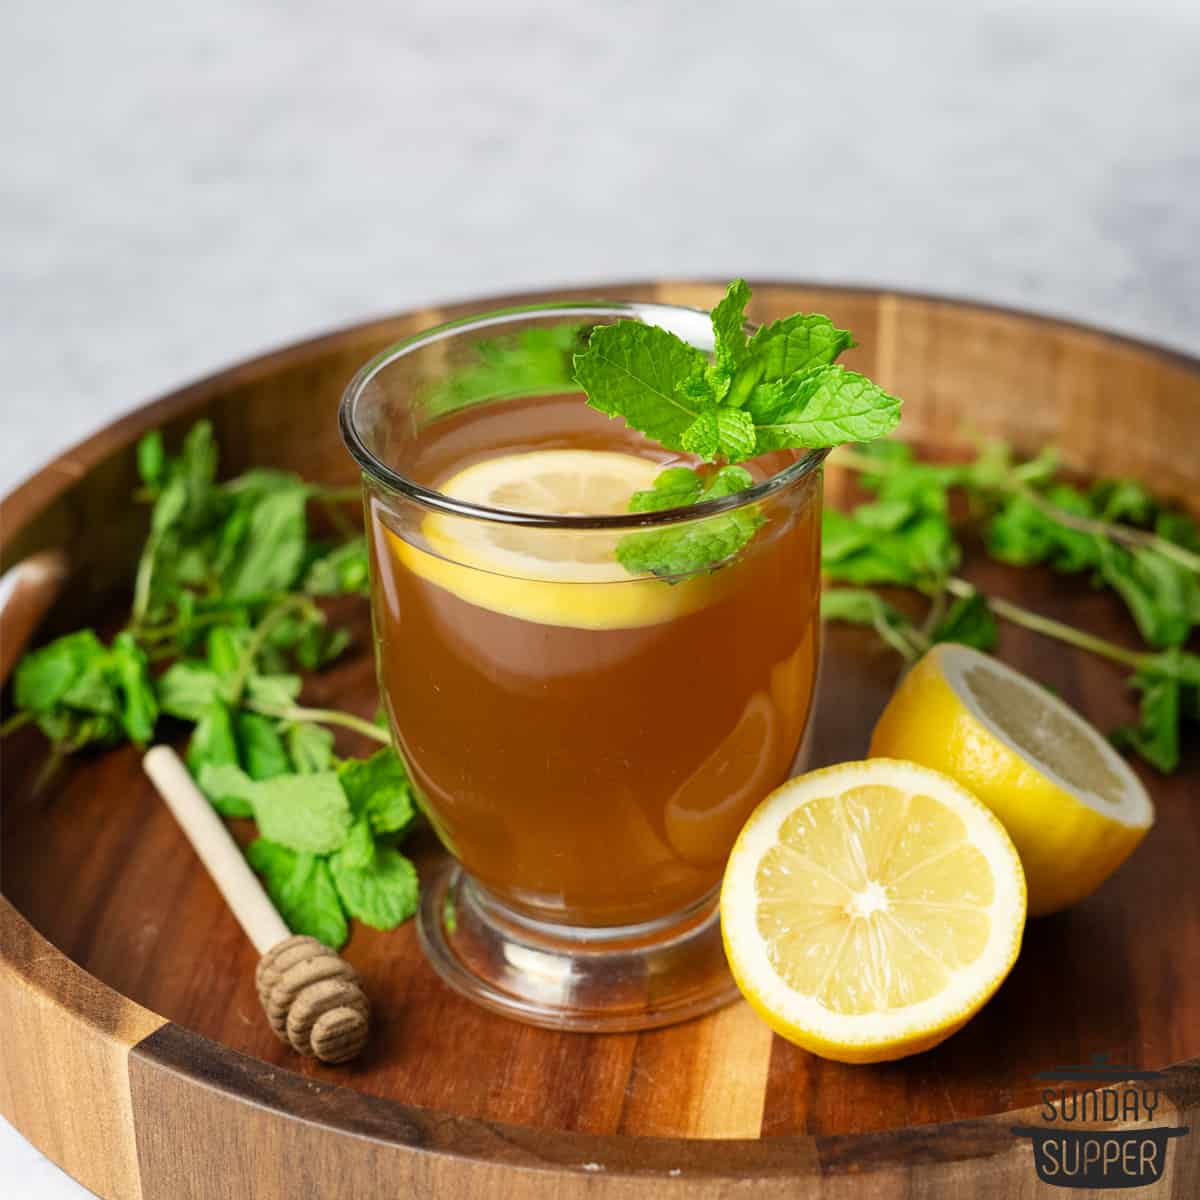 a glass of starbucks medicine ball tea with a sprig of mint and a lemon slice